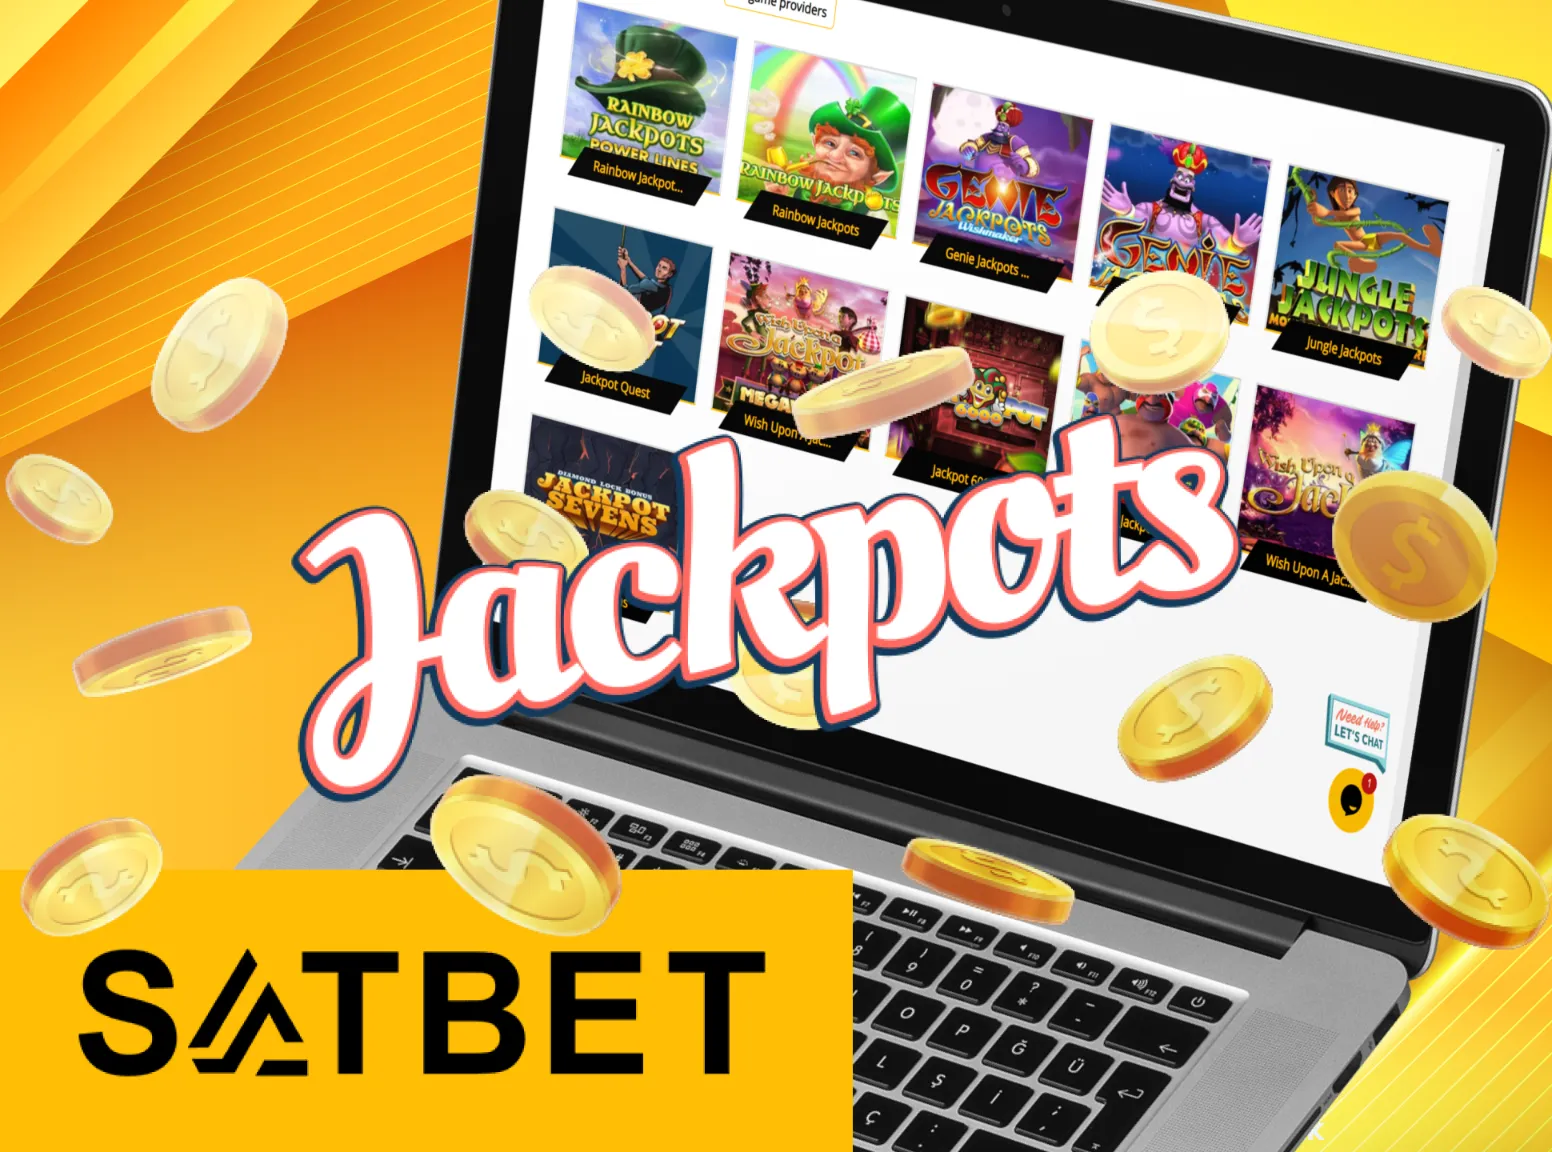 Win jackpot by playing Satbet jackpot games.